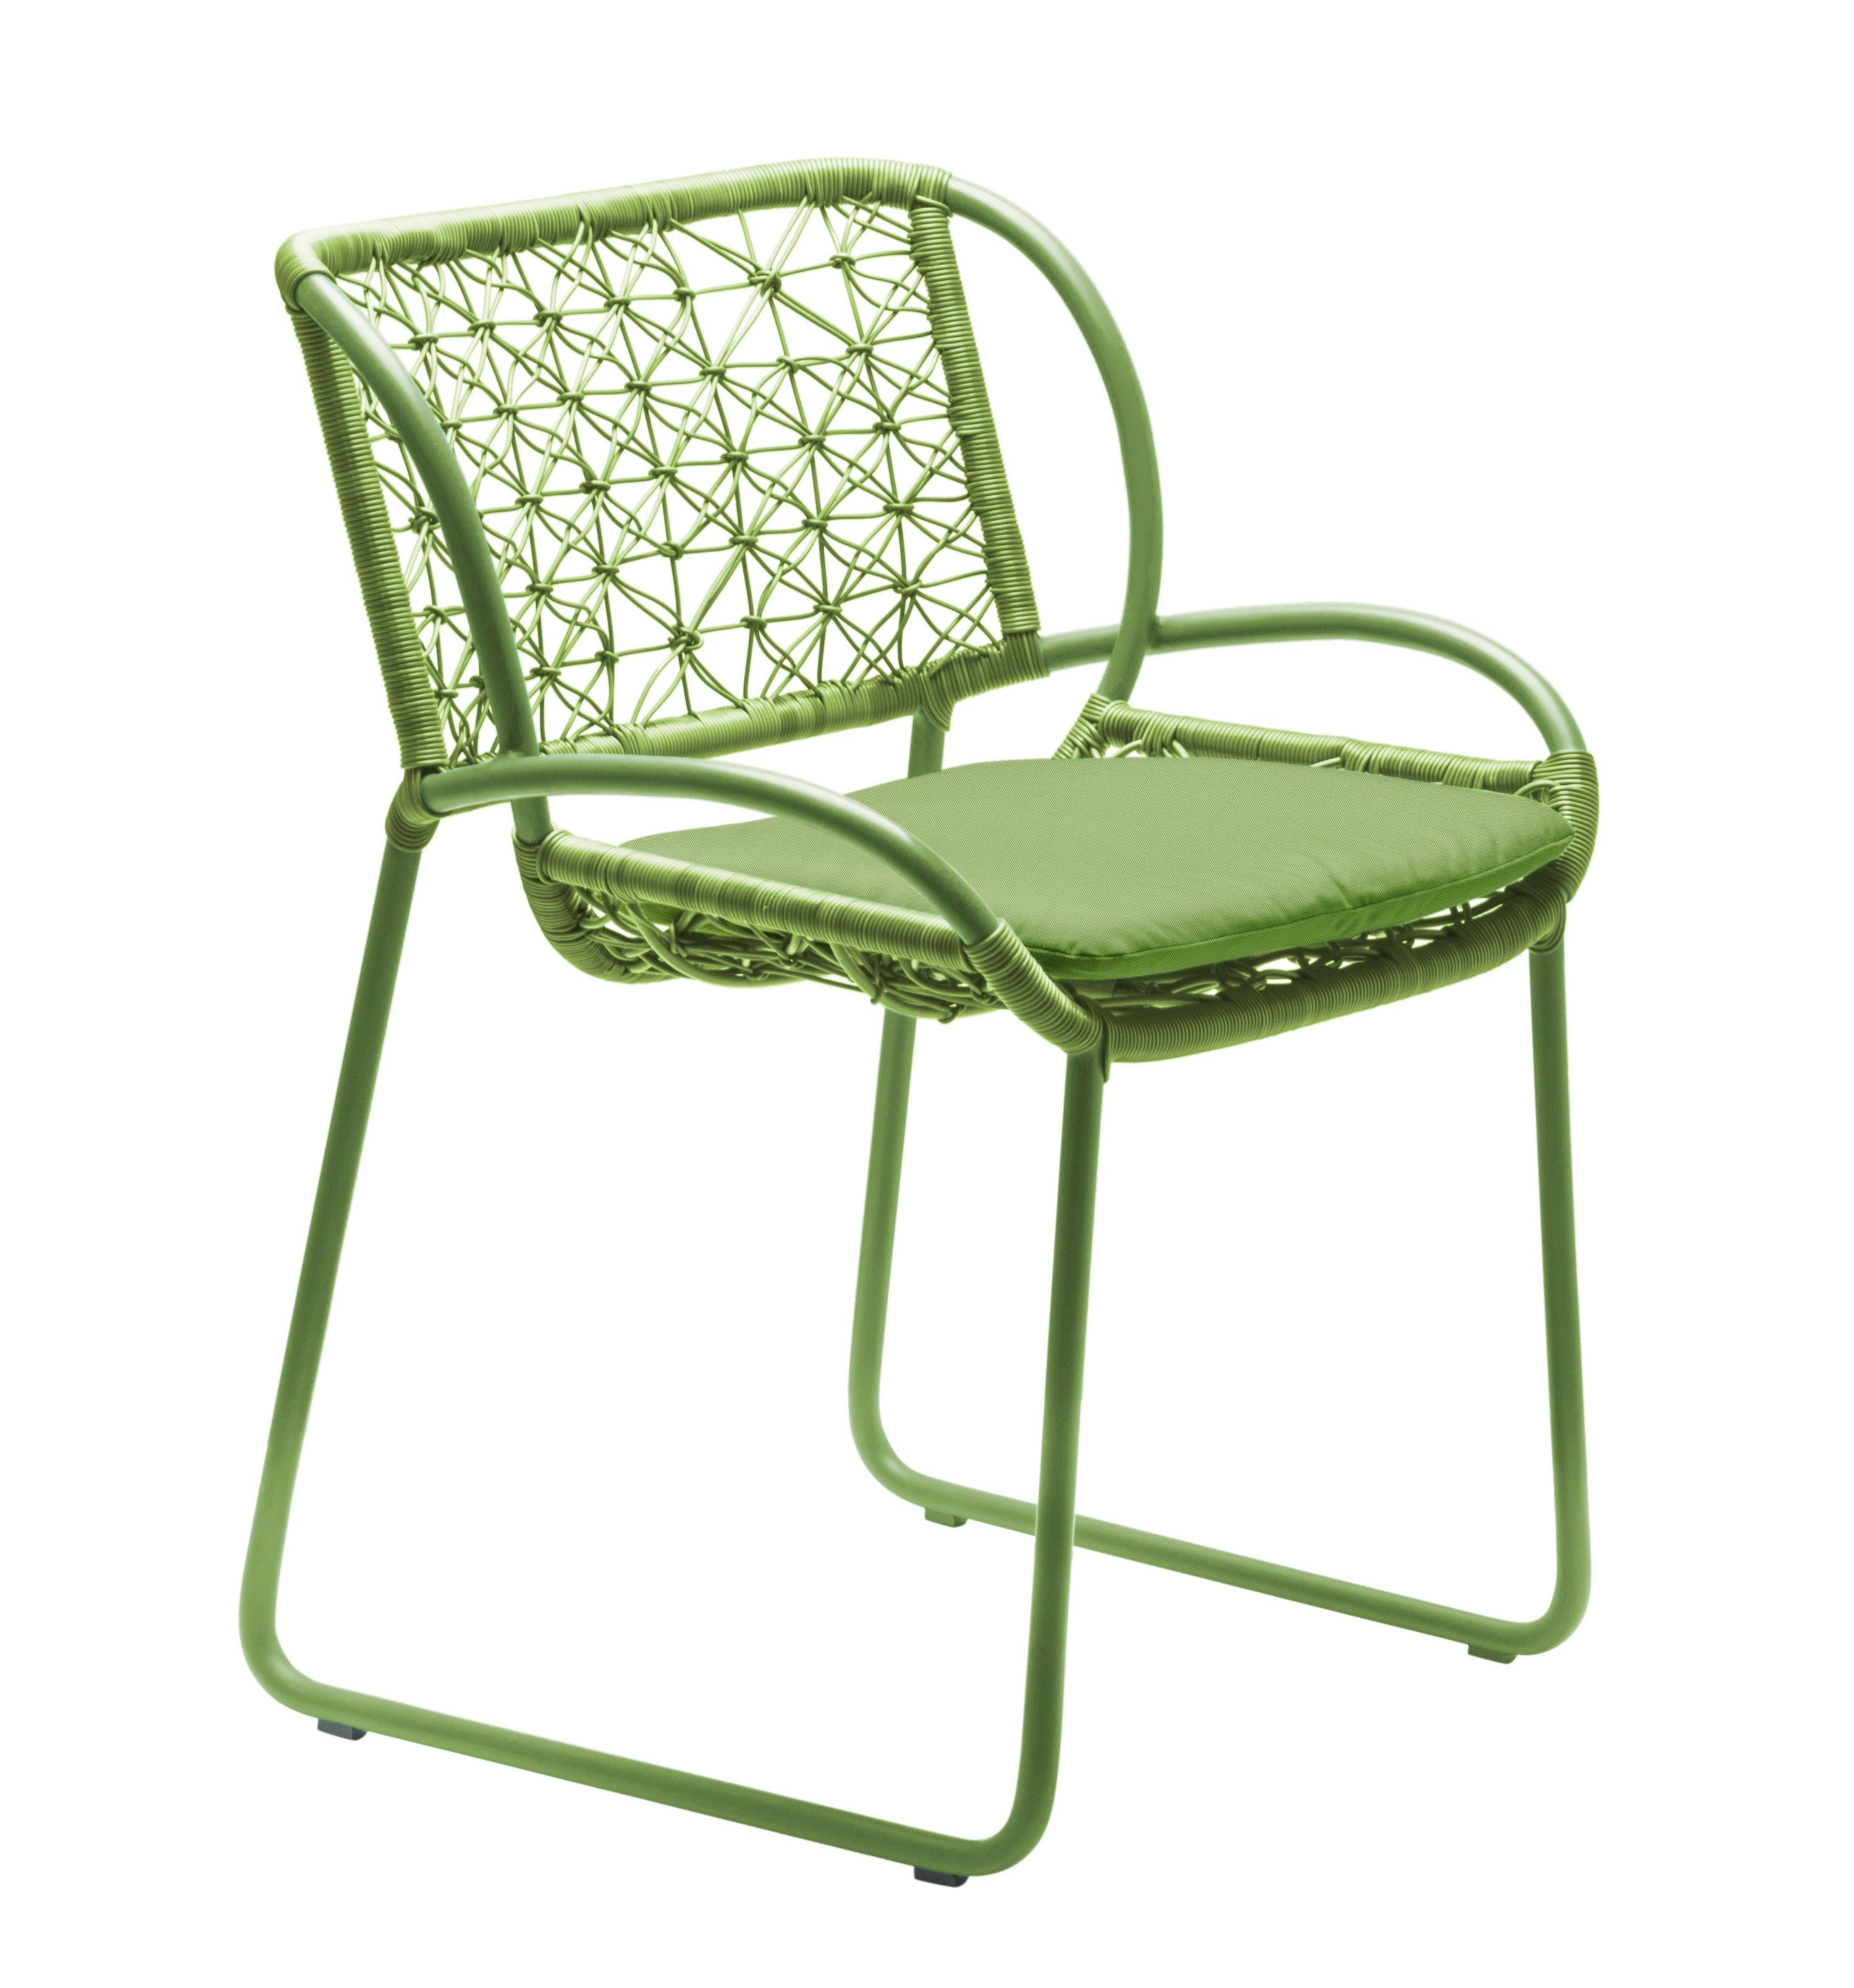 Armchair by Kenneth Cobonpue.
Materials: Polyethylene. Aluminum. 
Dimensions: 56 x 59 x H 80 cm.

The boldly colored frame and geometric weave pattern of the Adesso ottoman and chairs bring to mind a summer field of flowers. Coupled with a